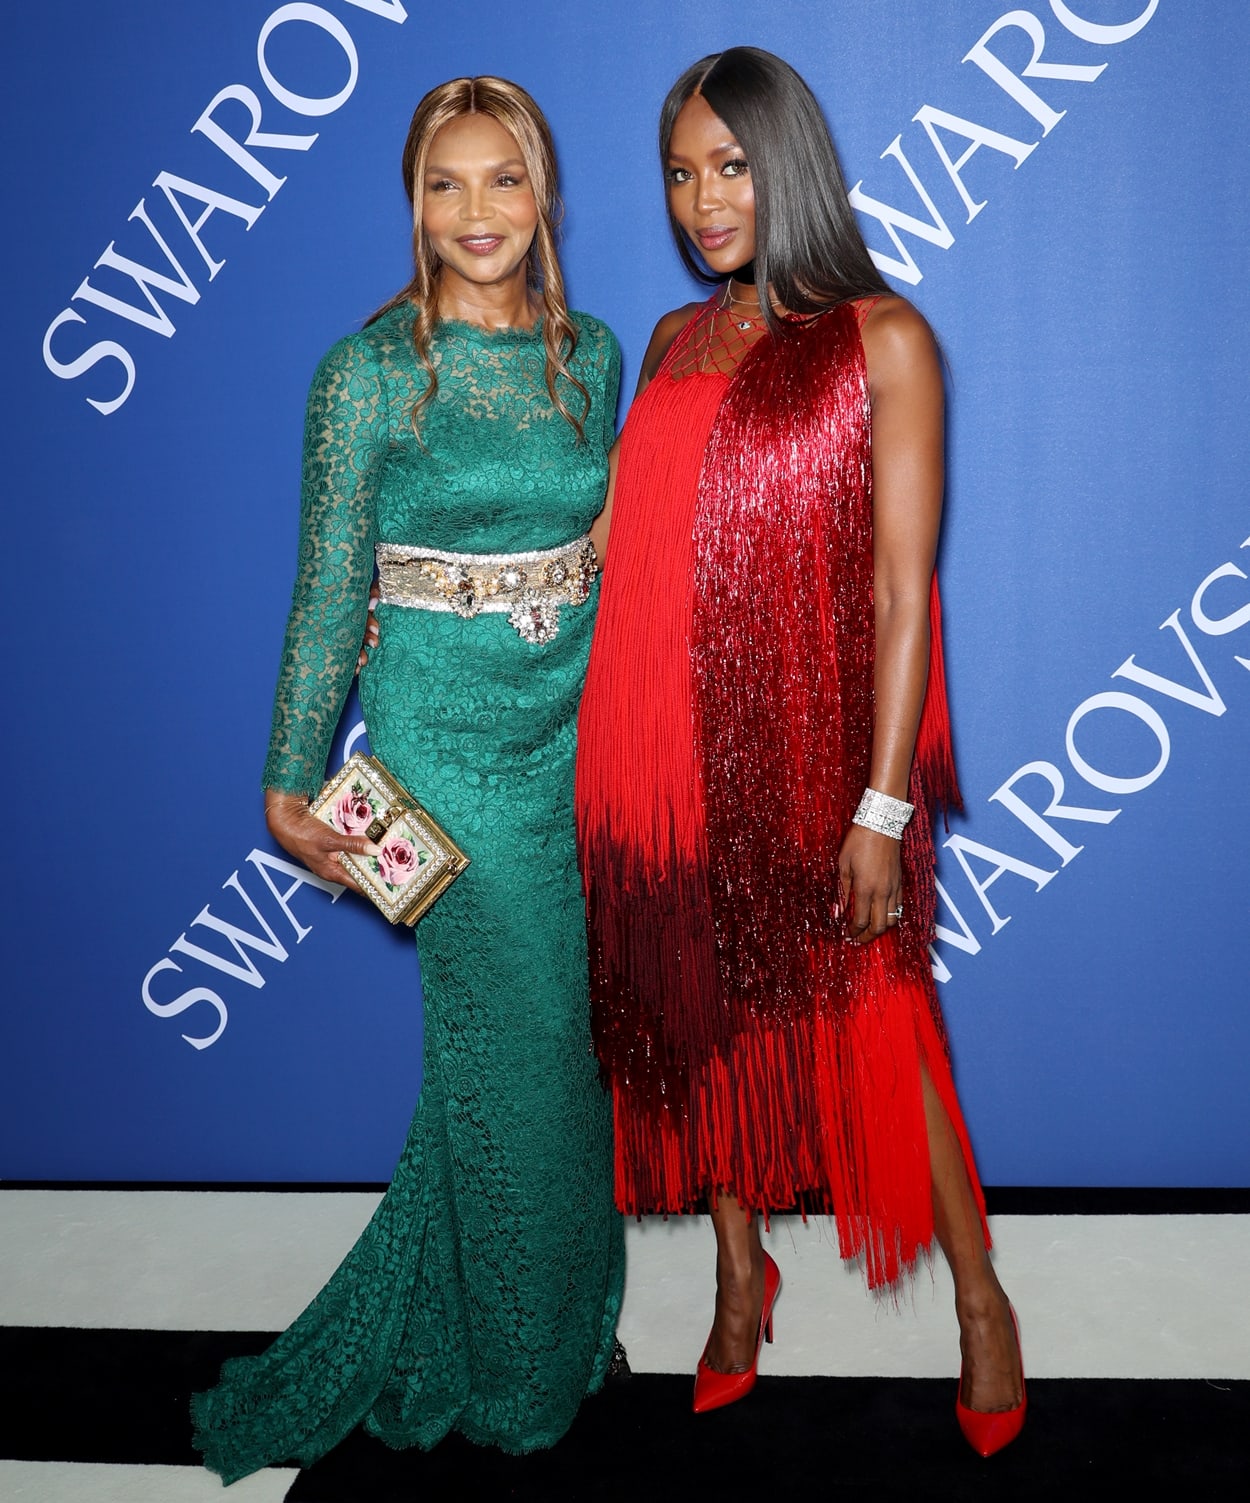 Naomi Campbell in Calvin Klein 205W39NYC and her mother Valerie Morris-Campbell attend the 2018 CFDA Fashion Awards